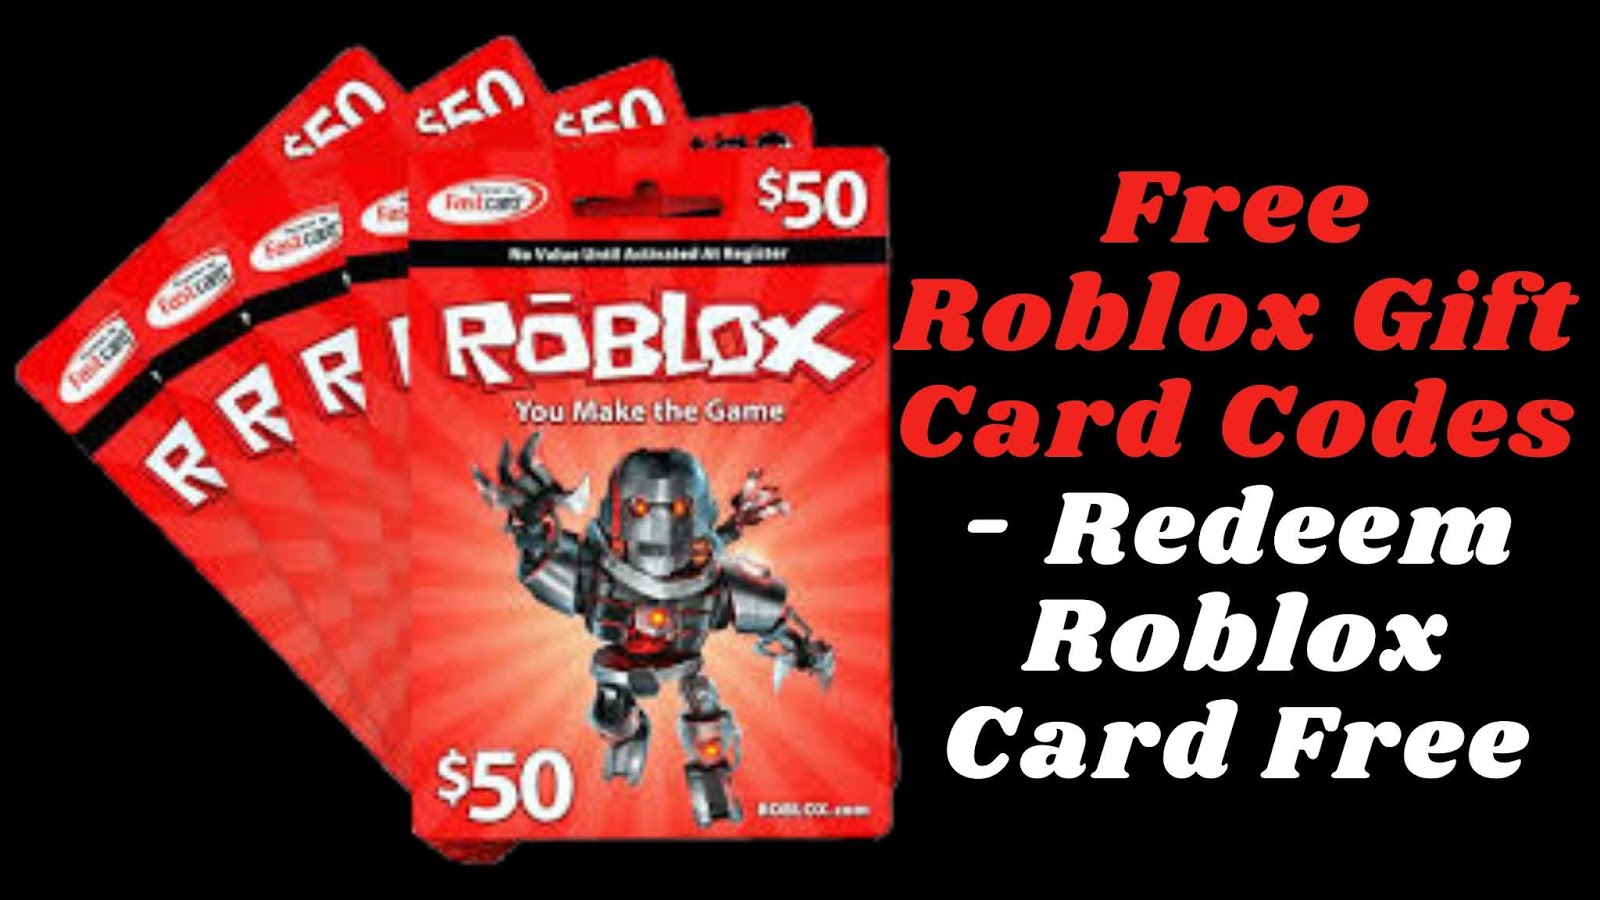 Free Gift Cards Free Roblox Gift Card Codes Redeem Roblox Card Free - codes to redeem roblox cards for robux